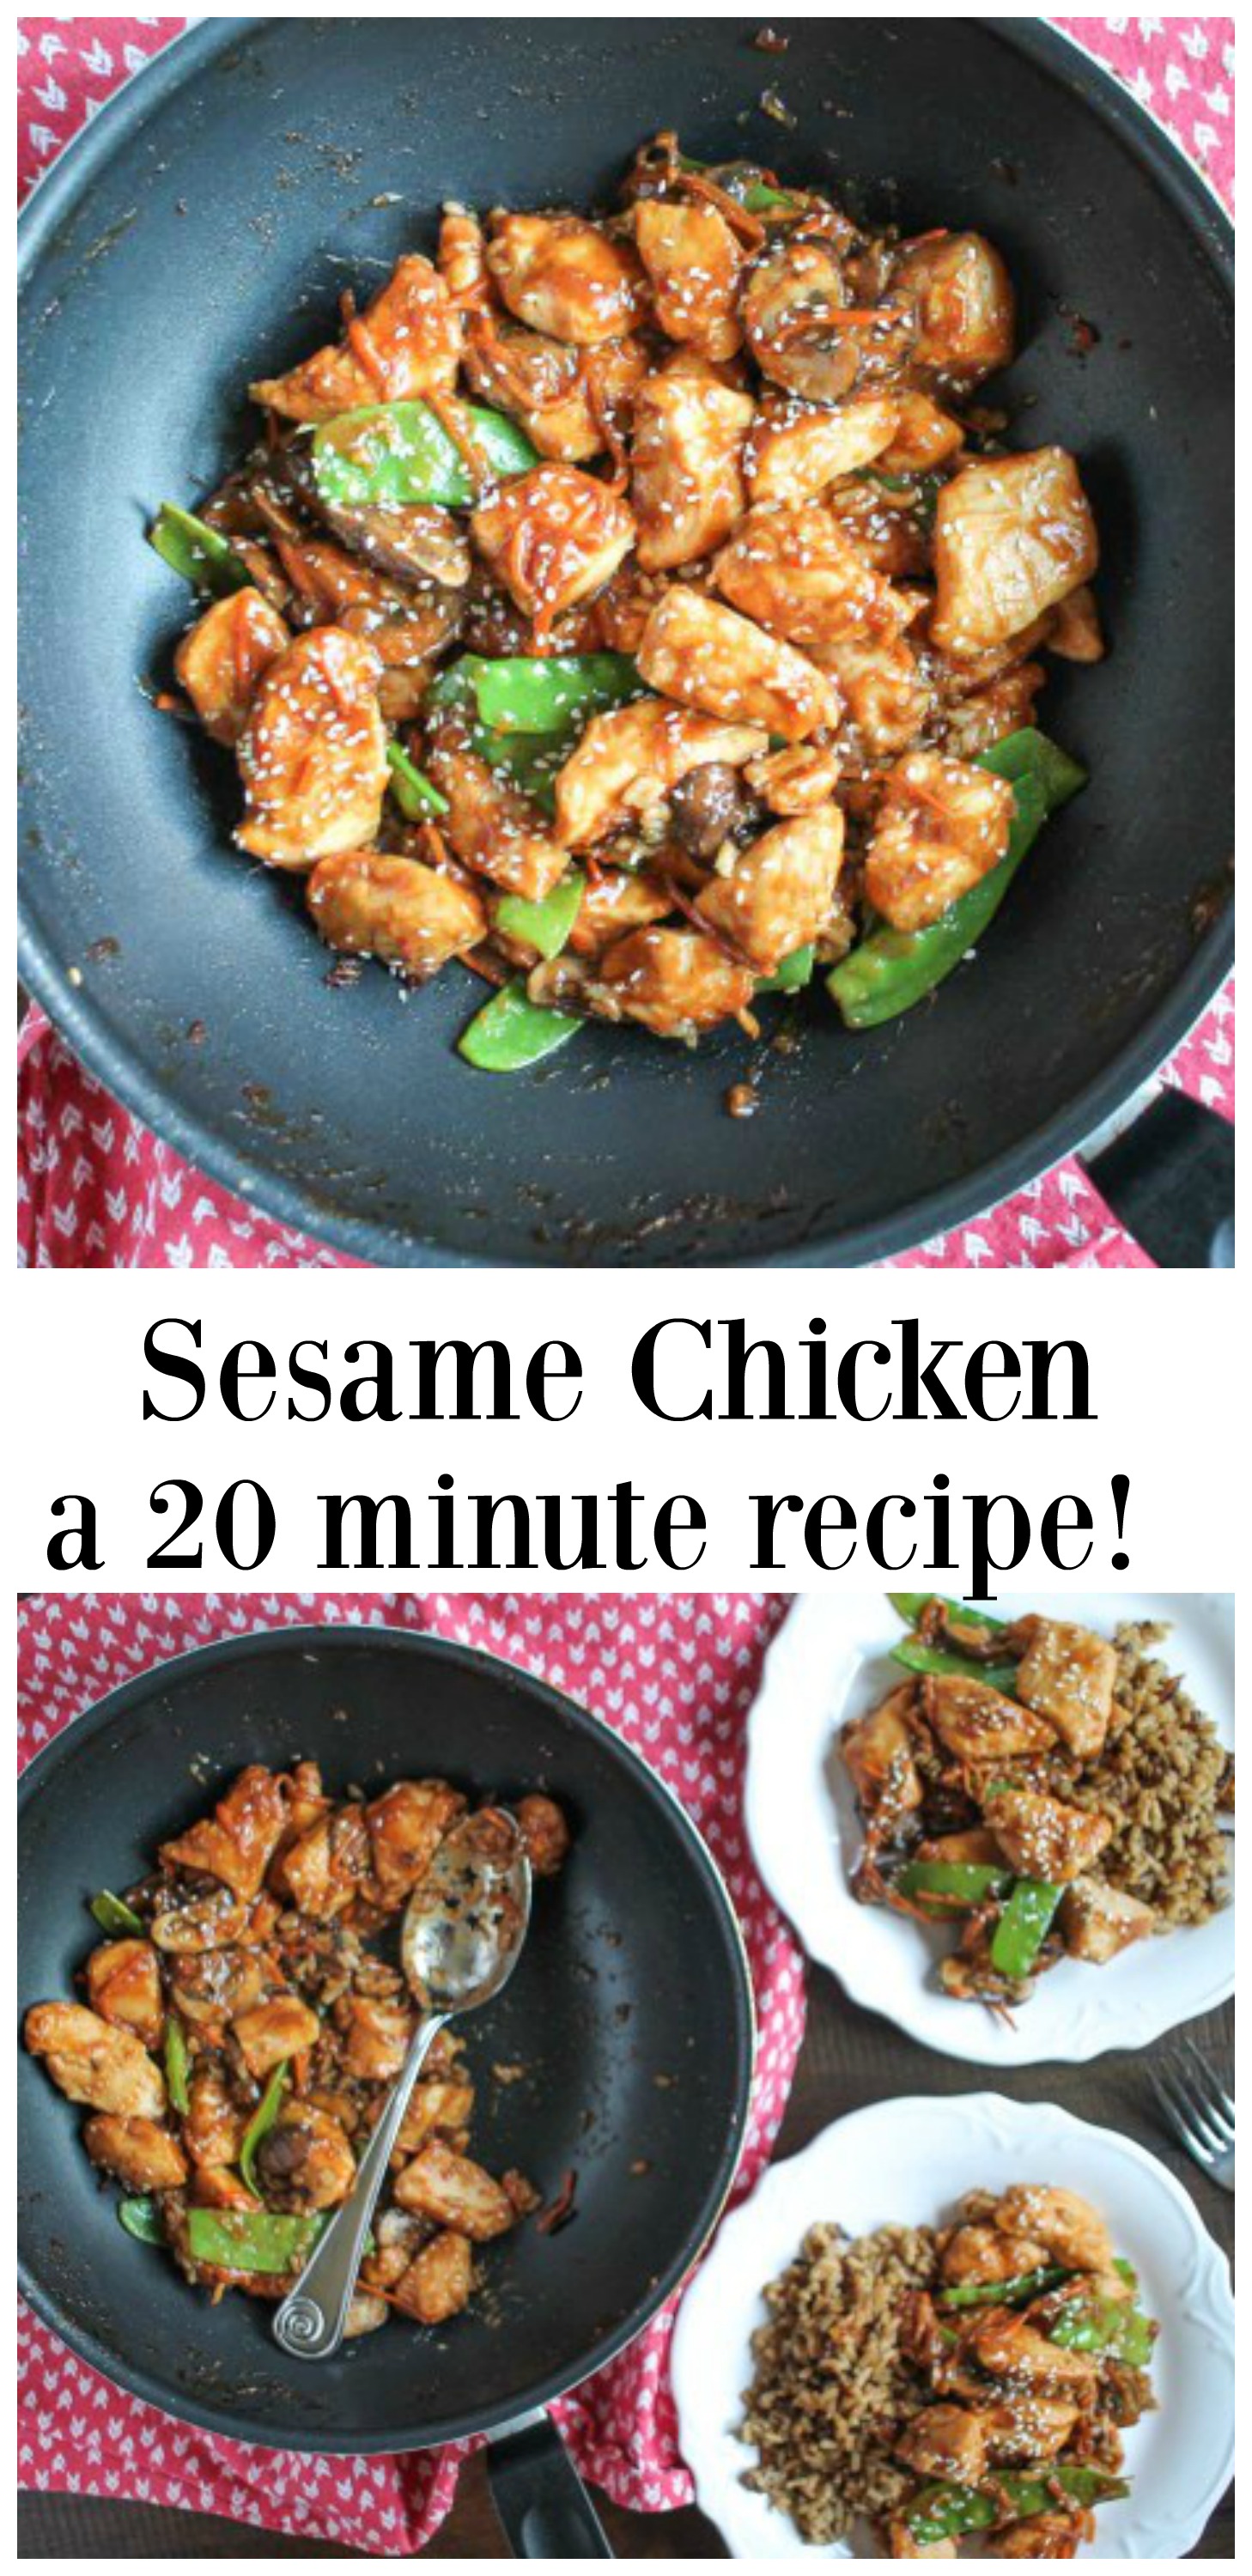 You will love this easy recipe for 20 minute Sesame Chicken! It has a sweet and spicy flavor and is loaded with veggies. It is a weeknight meal you will want to make again.